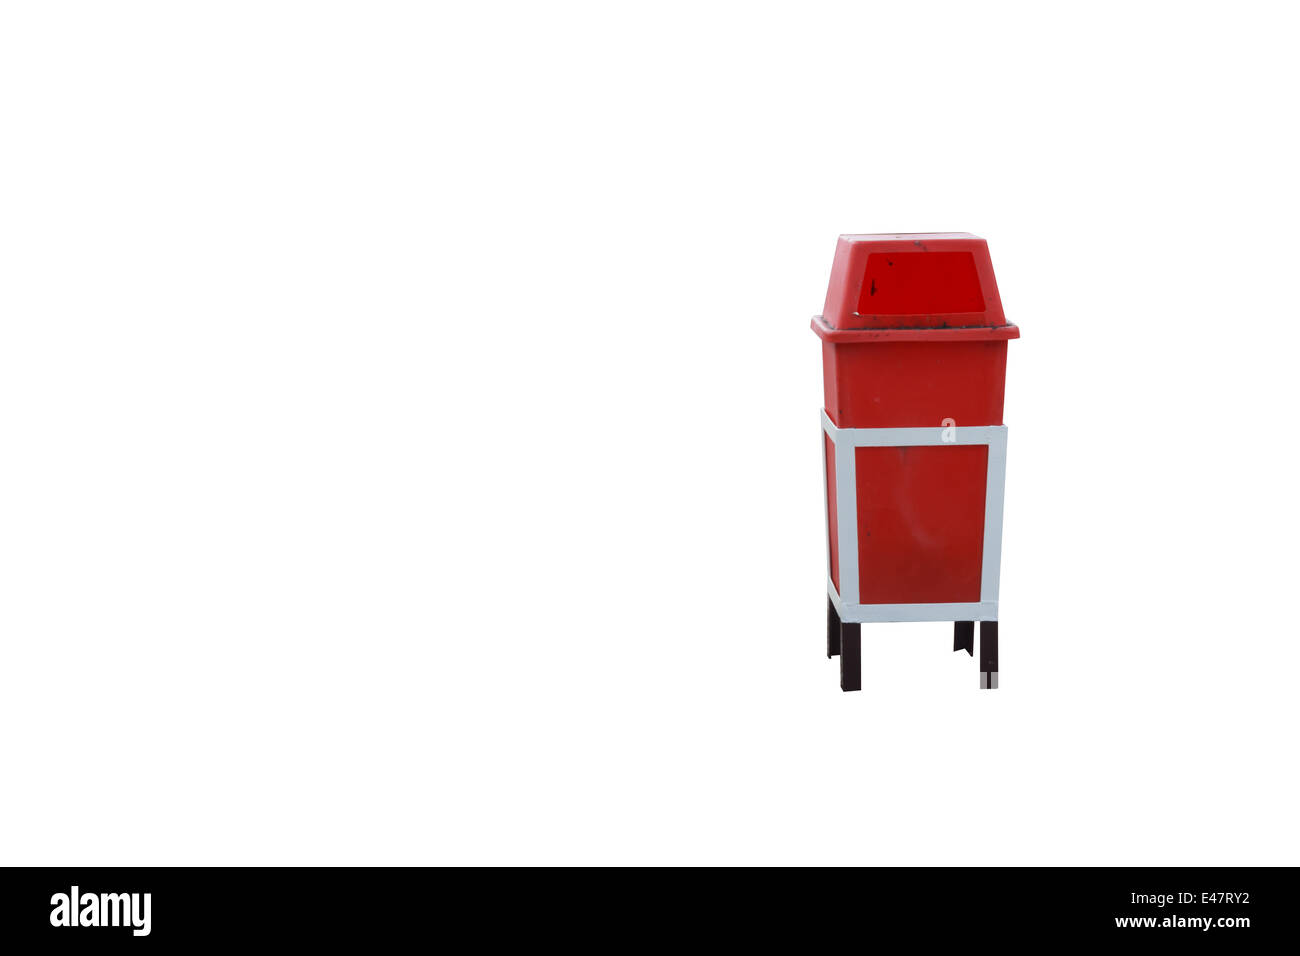 Bin red on white background. Stock Photo